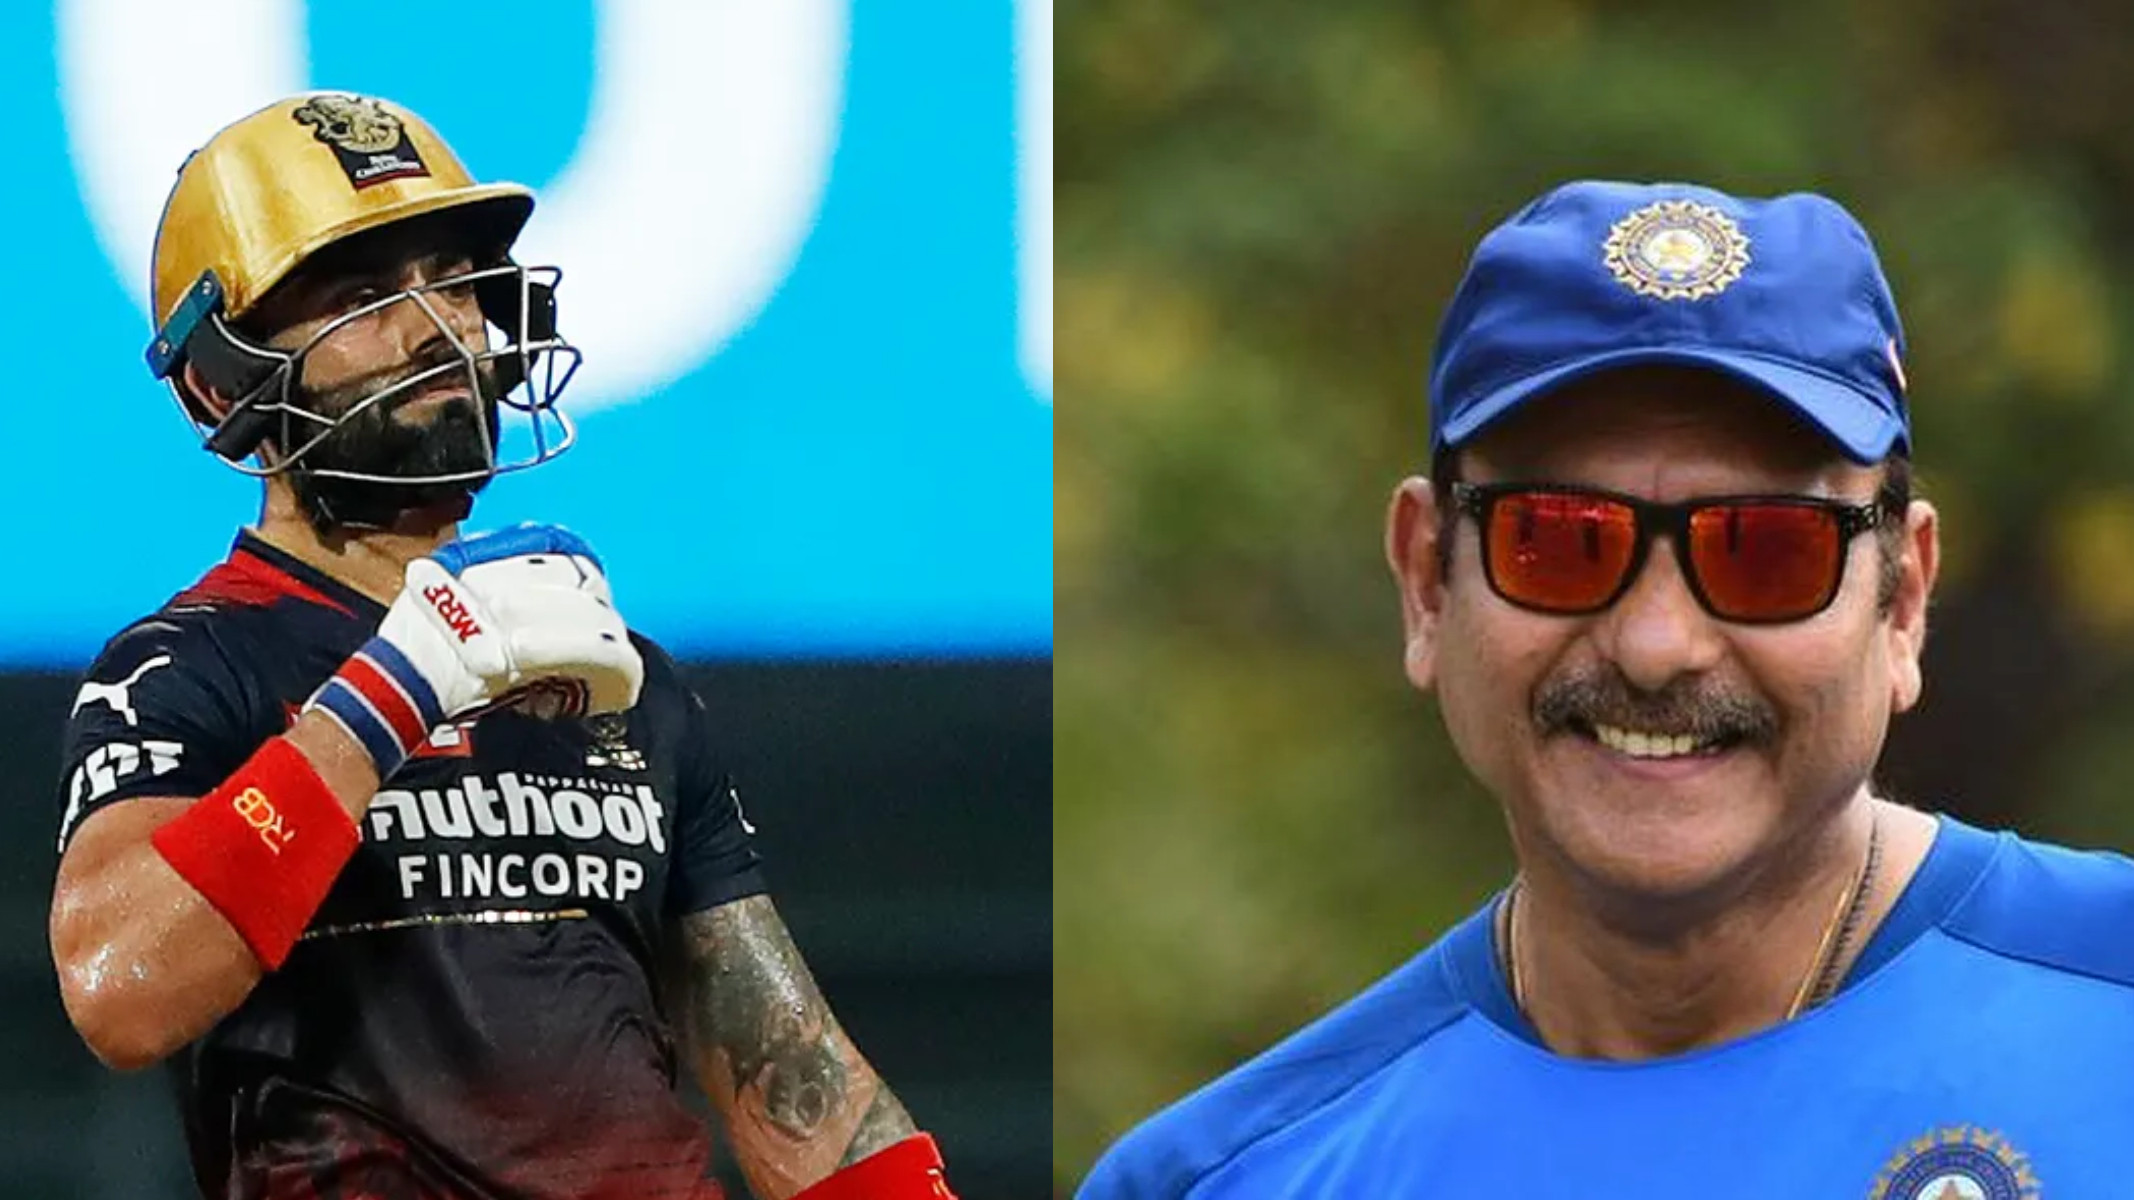 IPL 2022: “The pop is in the house and he’s announced it to the world”: Ravi Shastri on Virat Kohli's 73 vs GT 